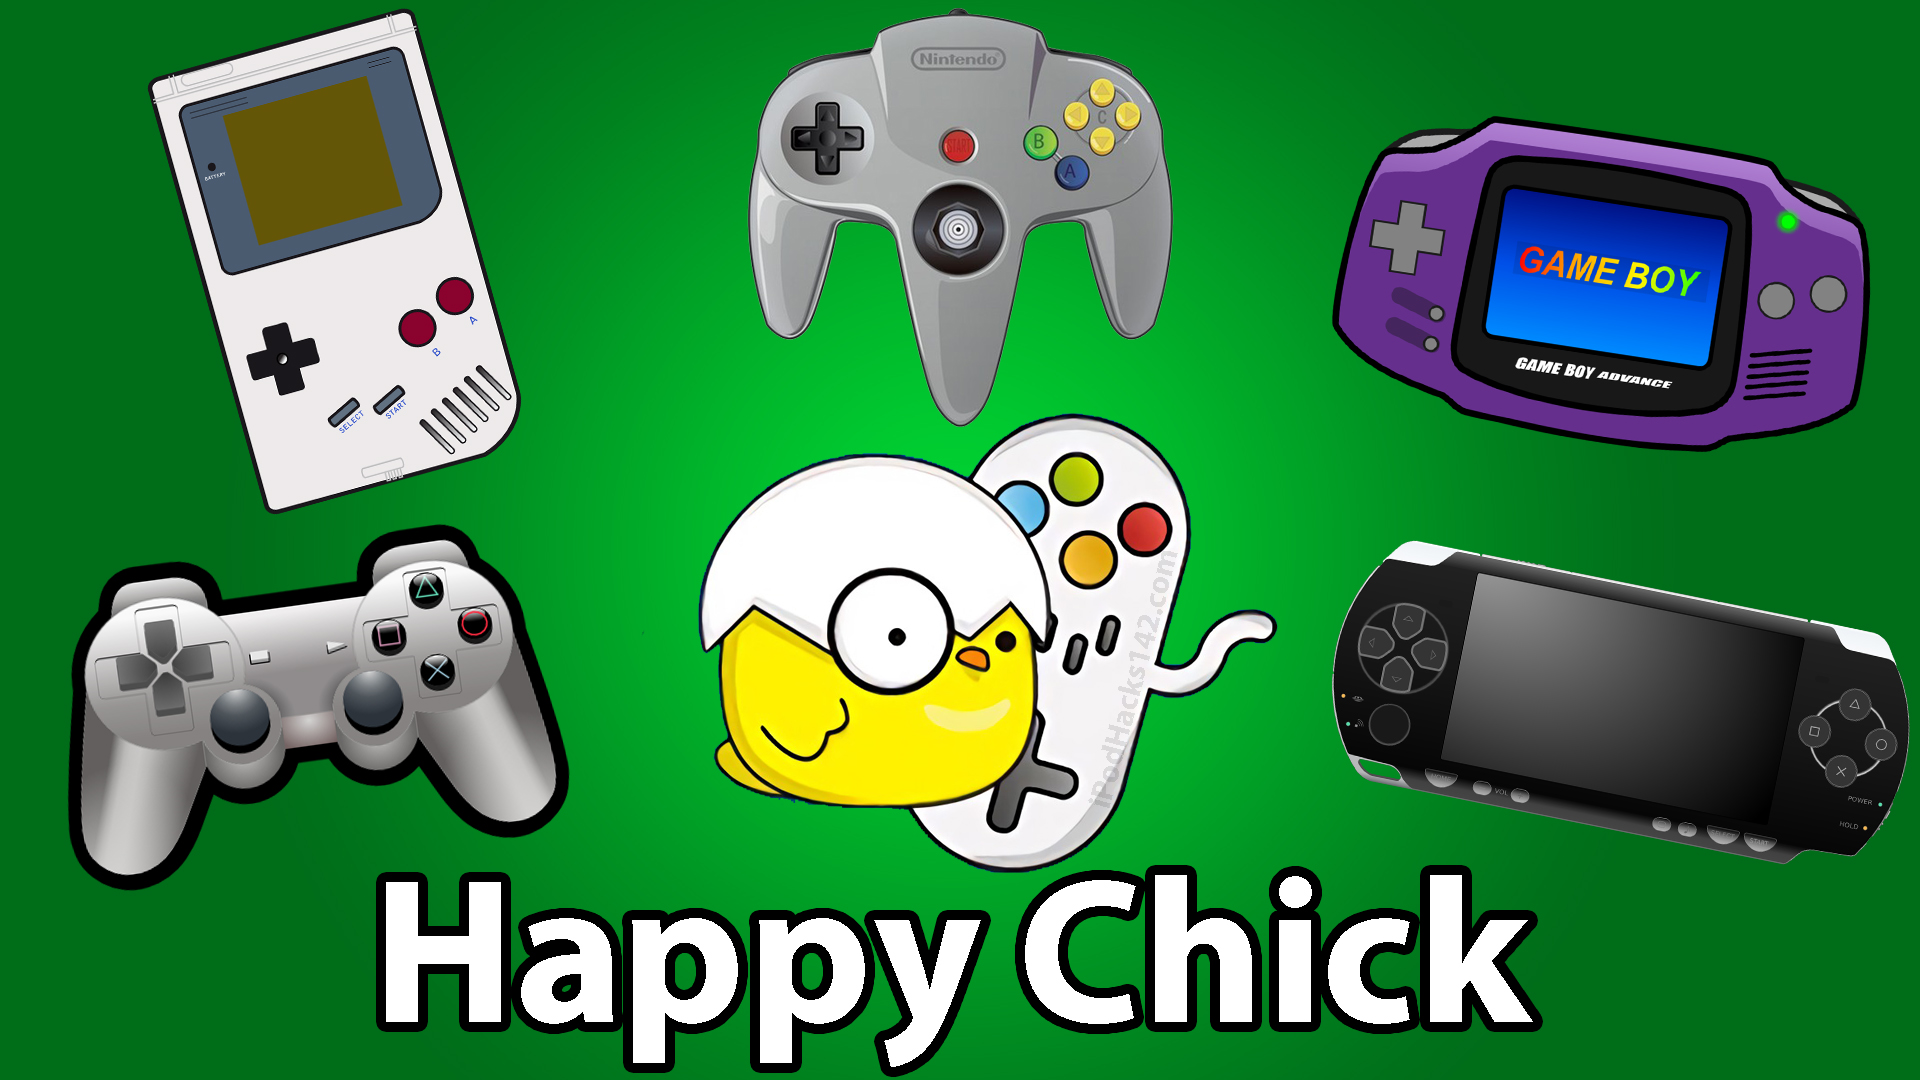 How To Install Happy Chick Multi Emulator On Ios 12 0 12 3 1 No